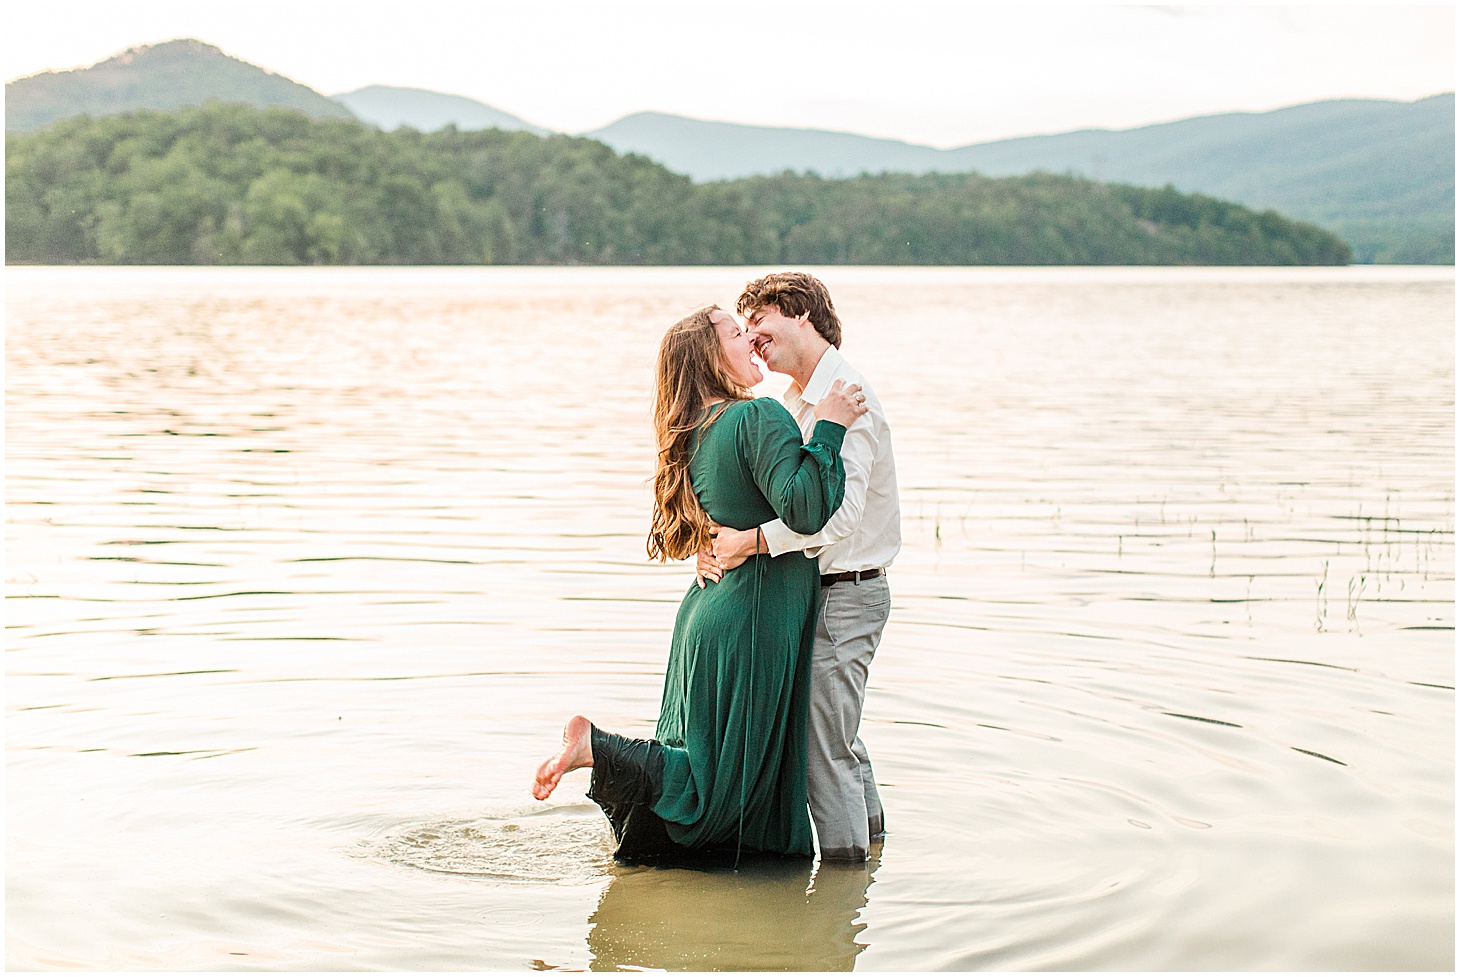 carvinscoveengagementsession_roanokeengagementsession_carvinscove_virginiawedding_virginiaweddingphotographer_vaweddingphotographer_photo_0071.jpg